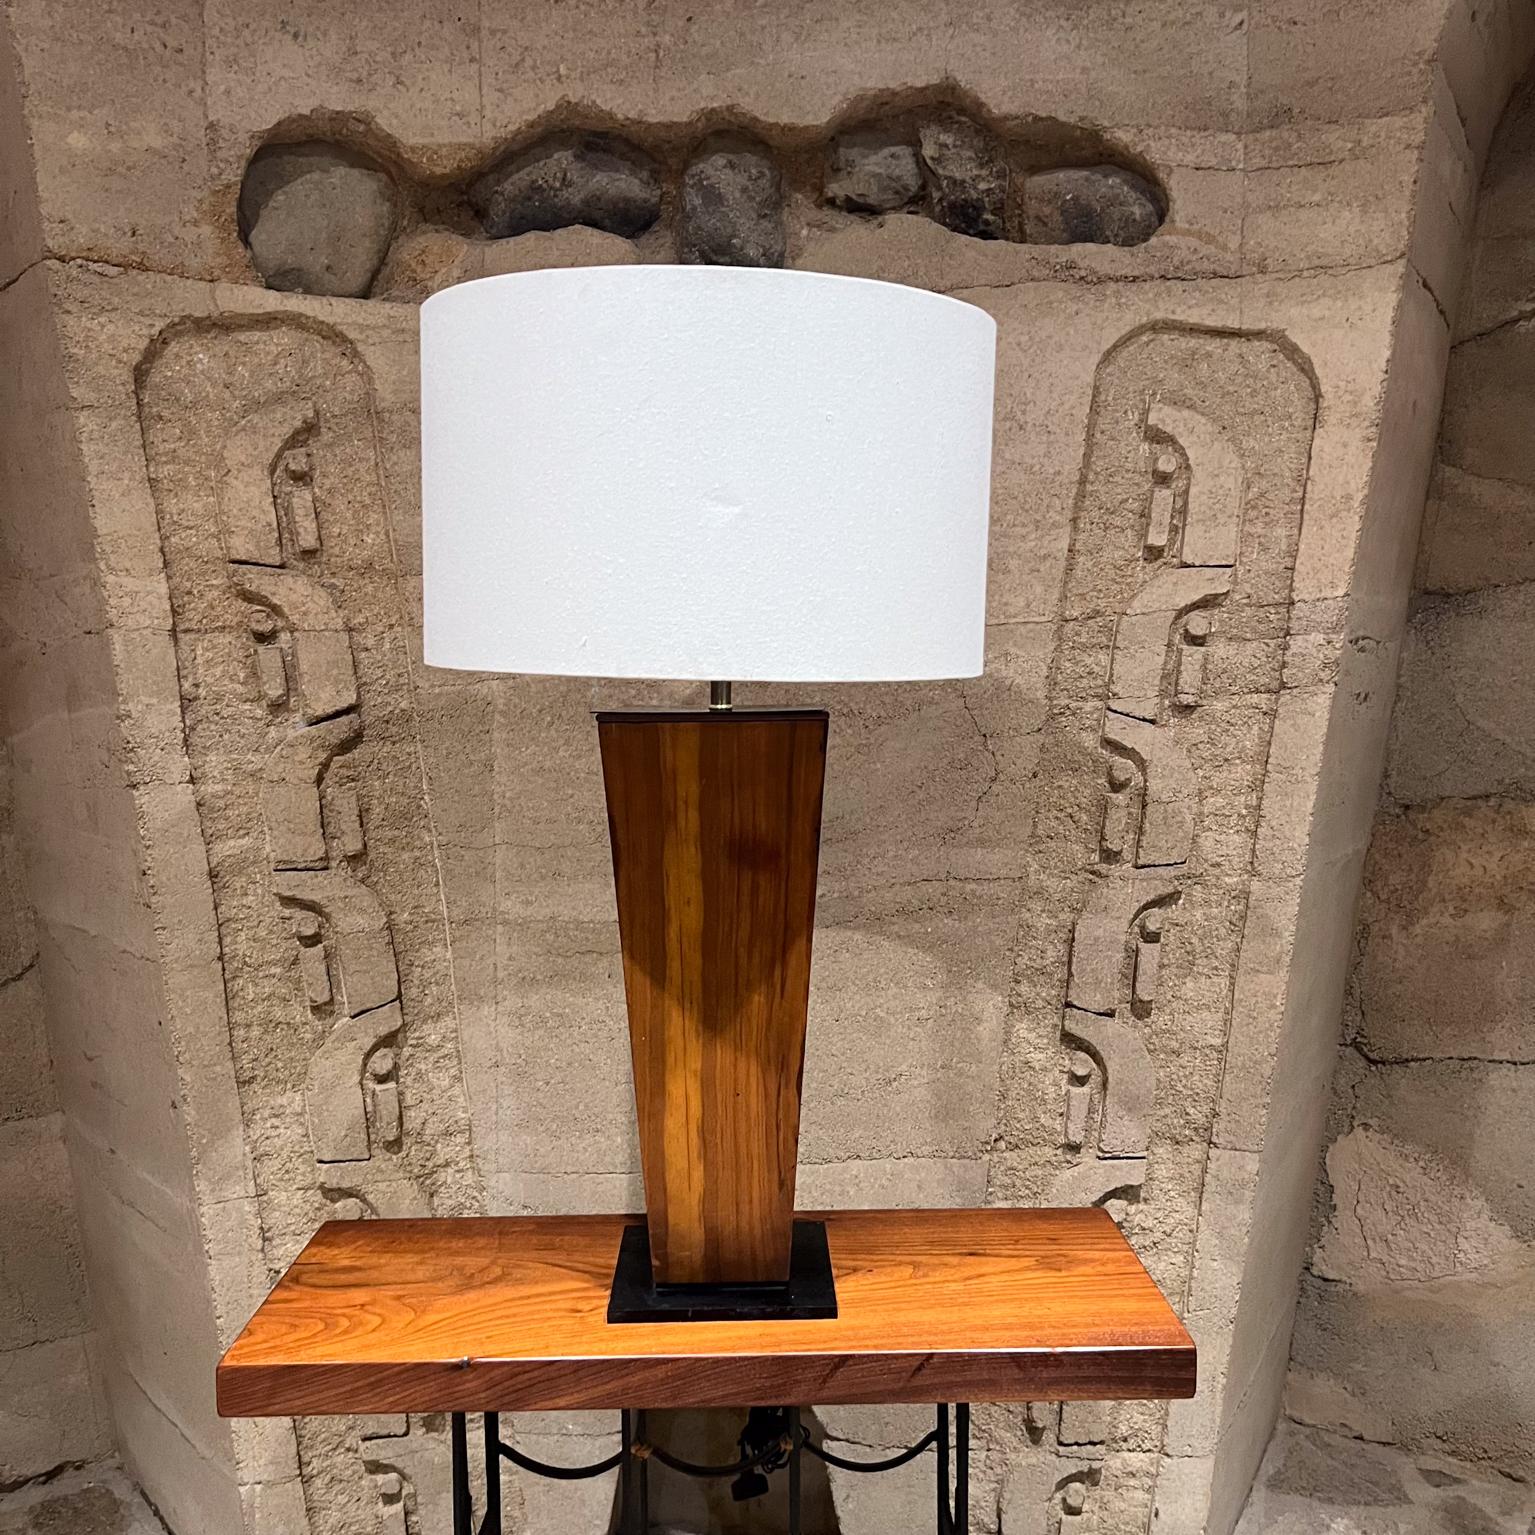 1950s Modernist sculptural Table Lamp Mexico City
exotic wood 
29 socket x 8 x 8
Original vintage condition, unrestored.
No lamp shade is included.
Refer to images.
